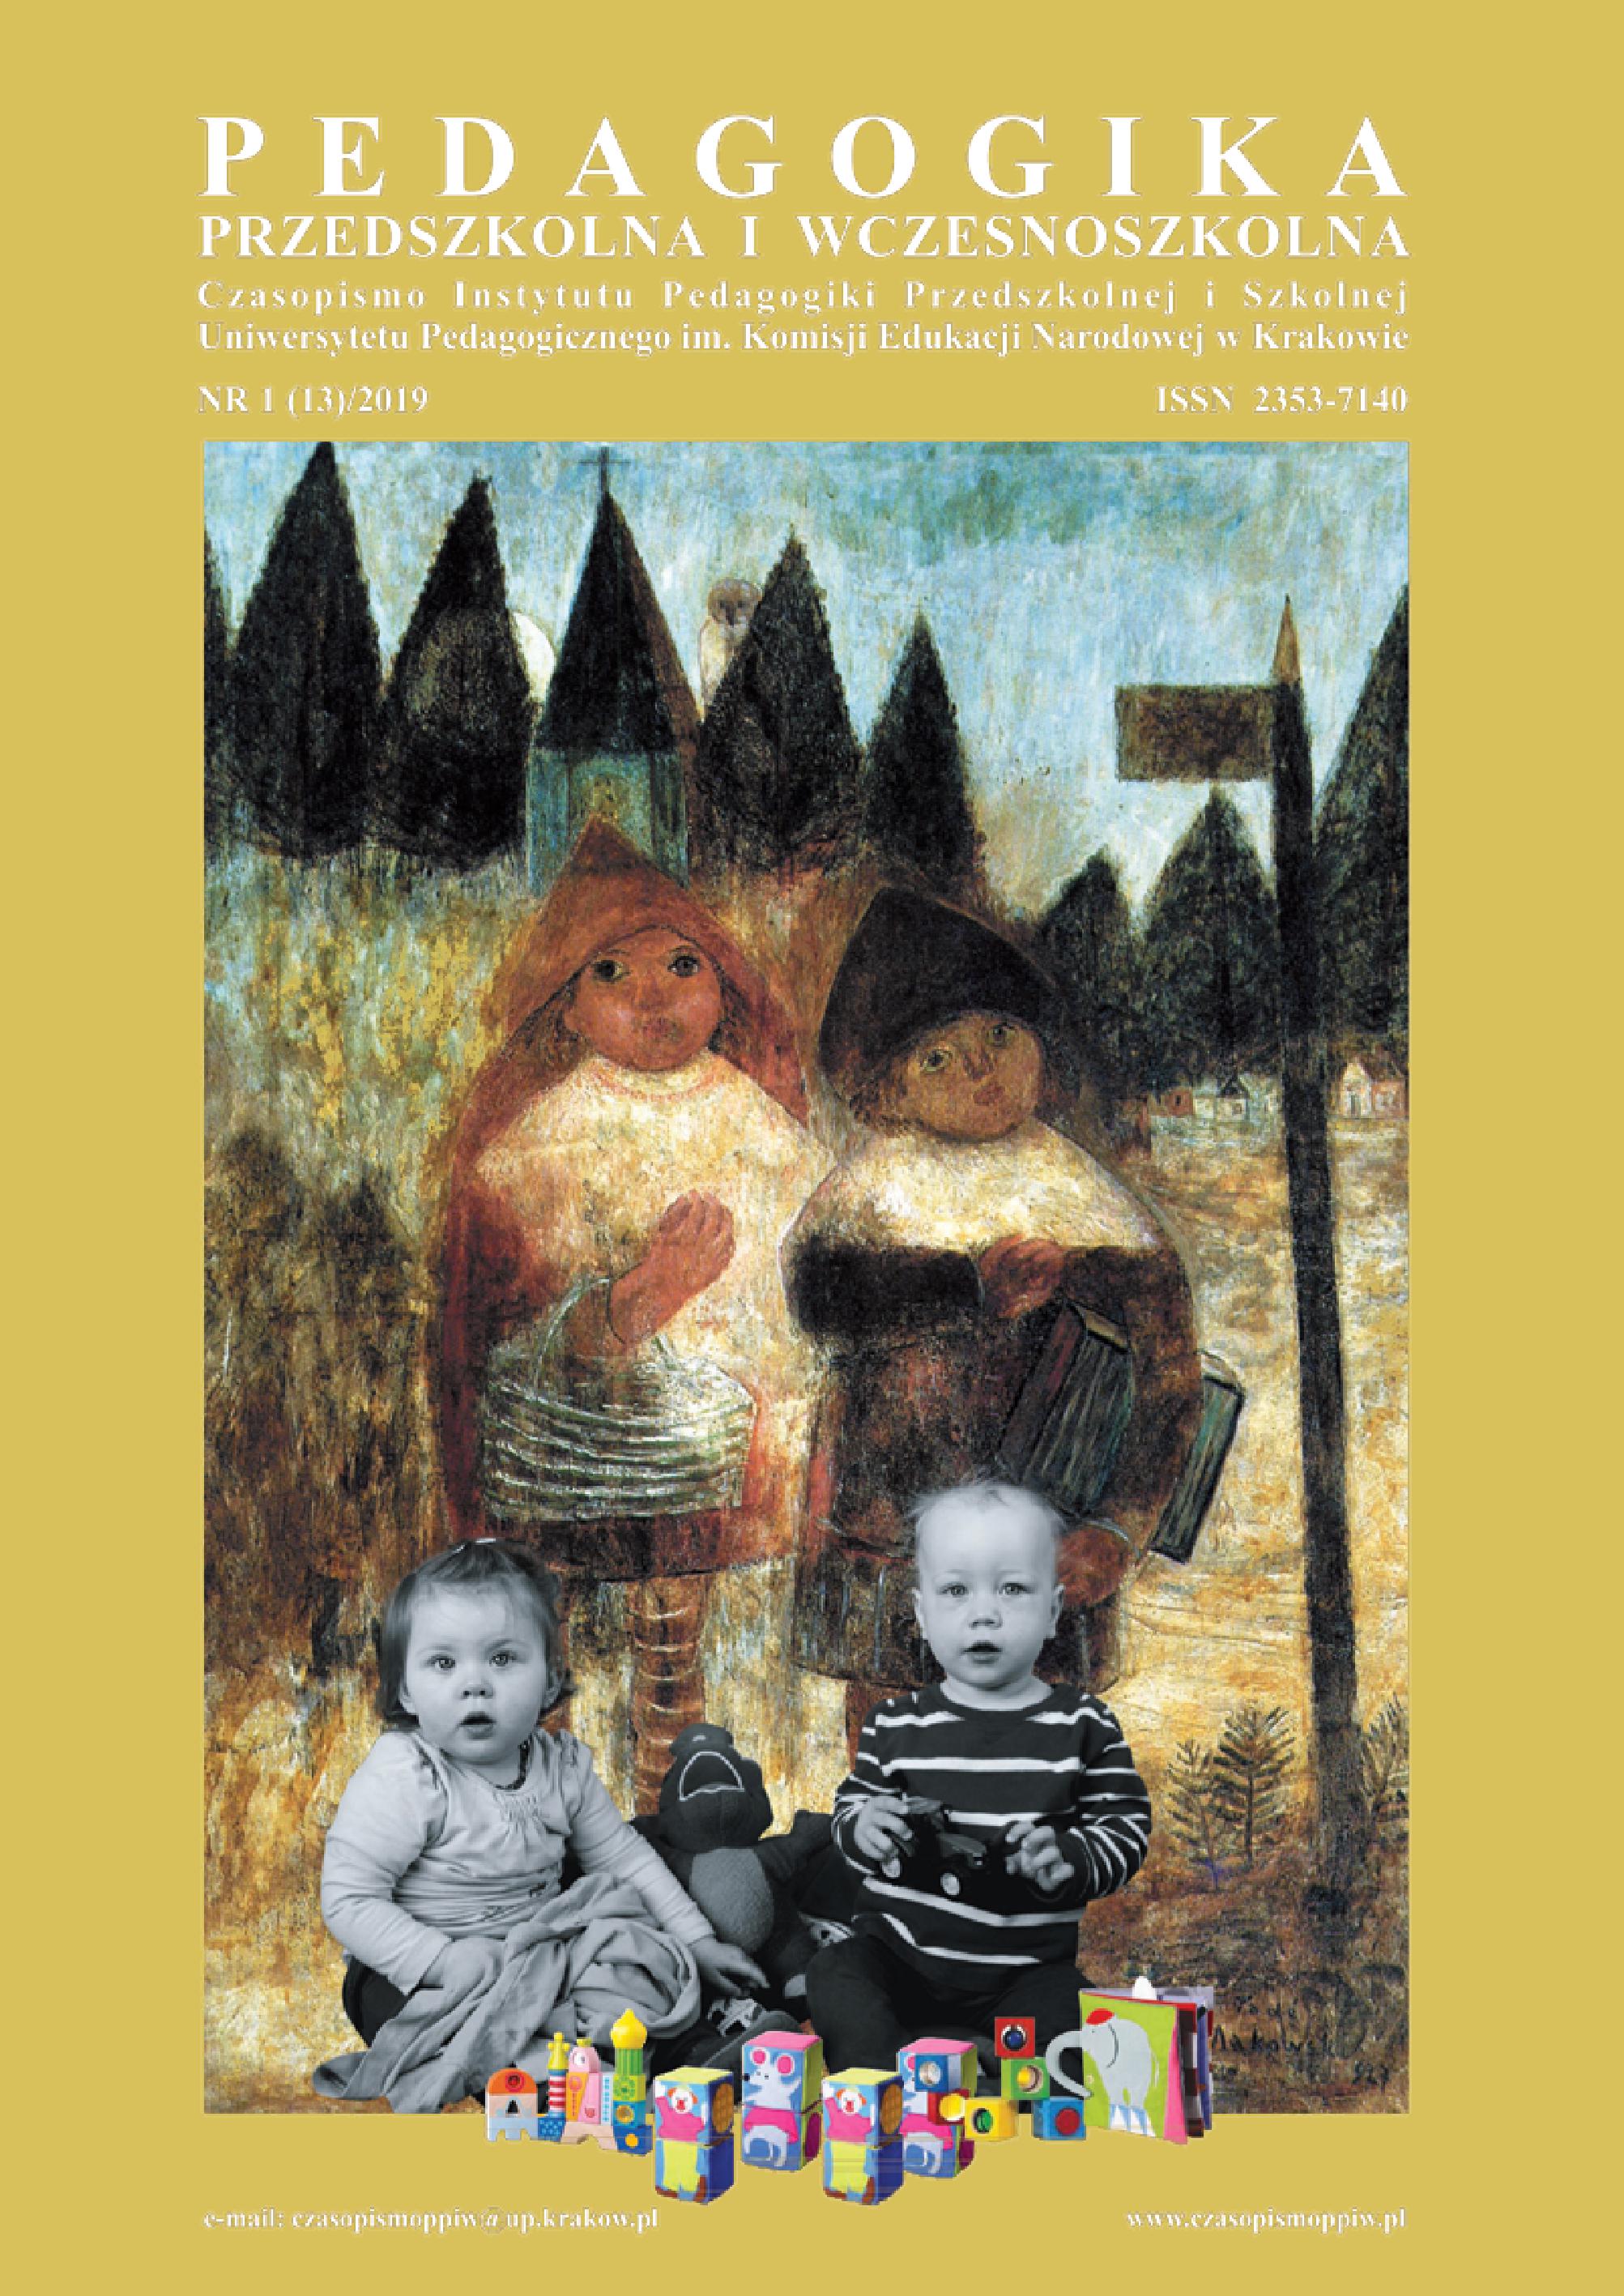 The image of a talented child as a problematic individual
in modern education Cover Image